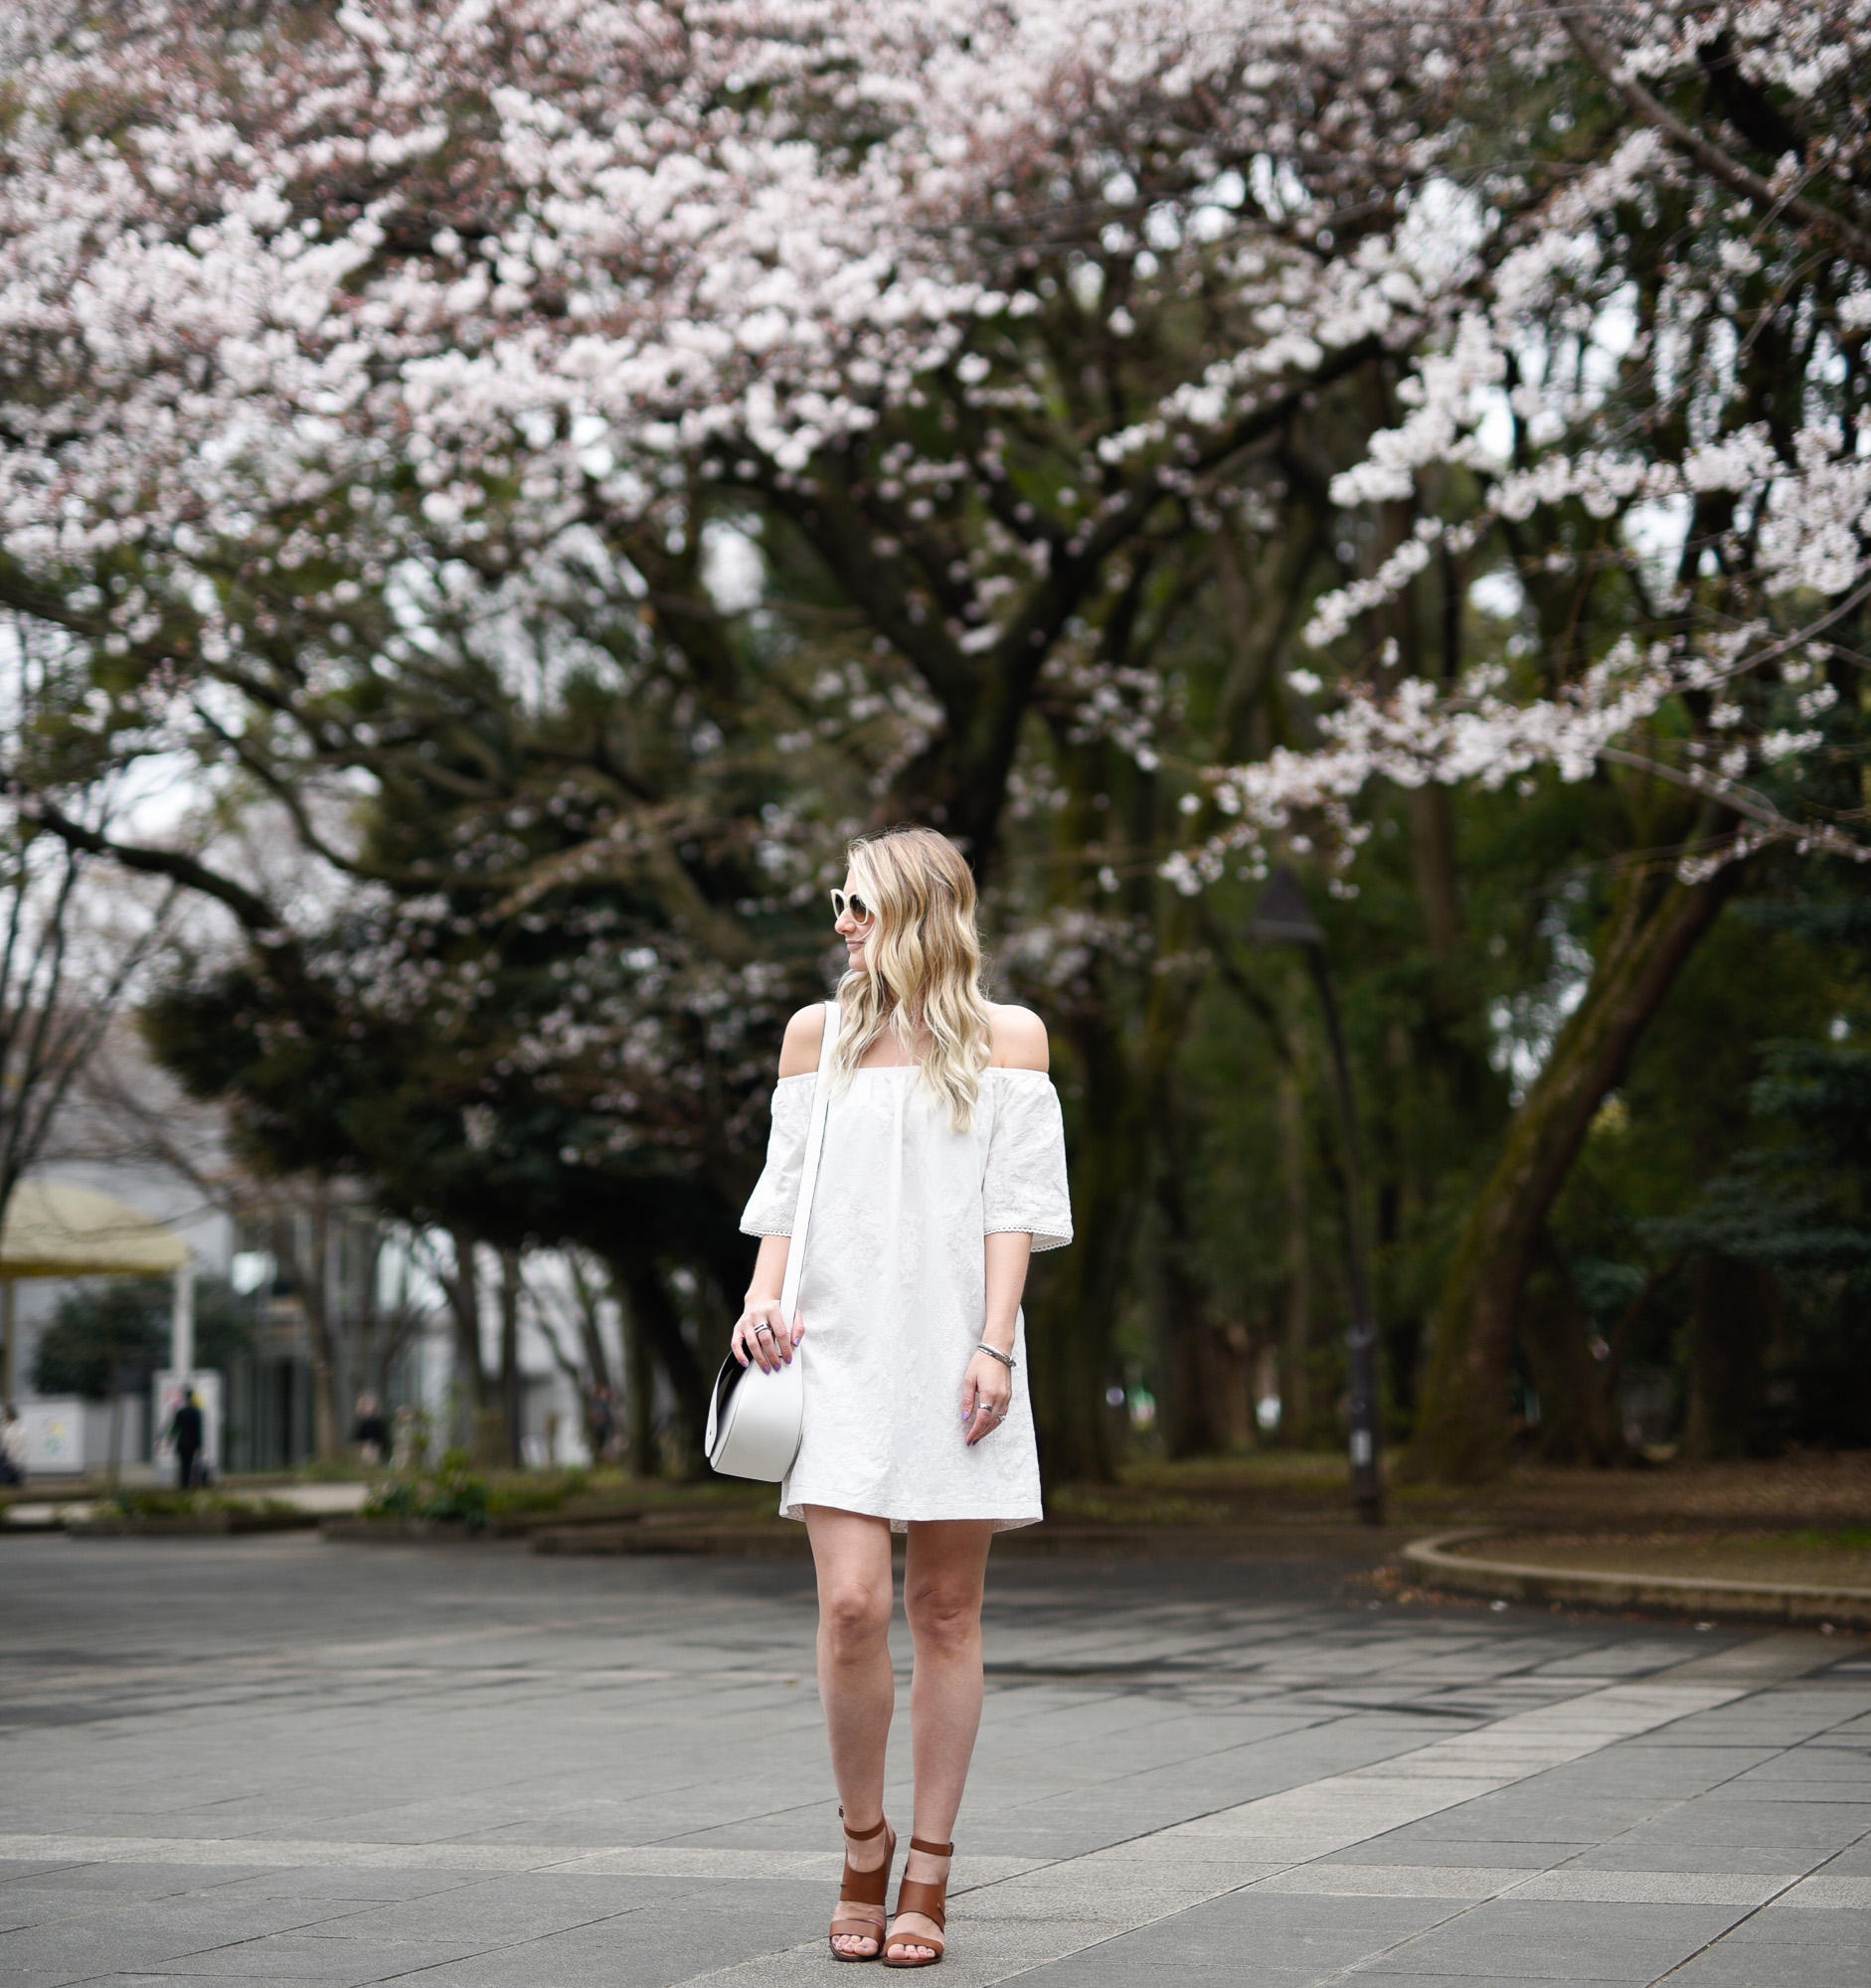 White off the shoulder dress in Ueno Park, Tokyo during cherry blossom season. 